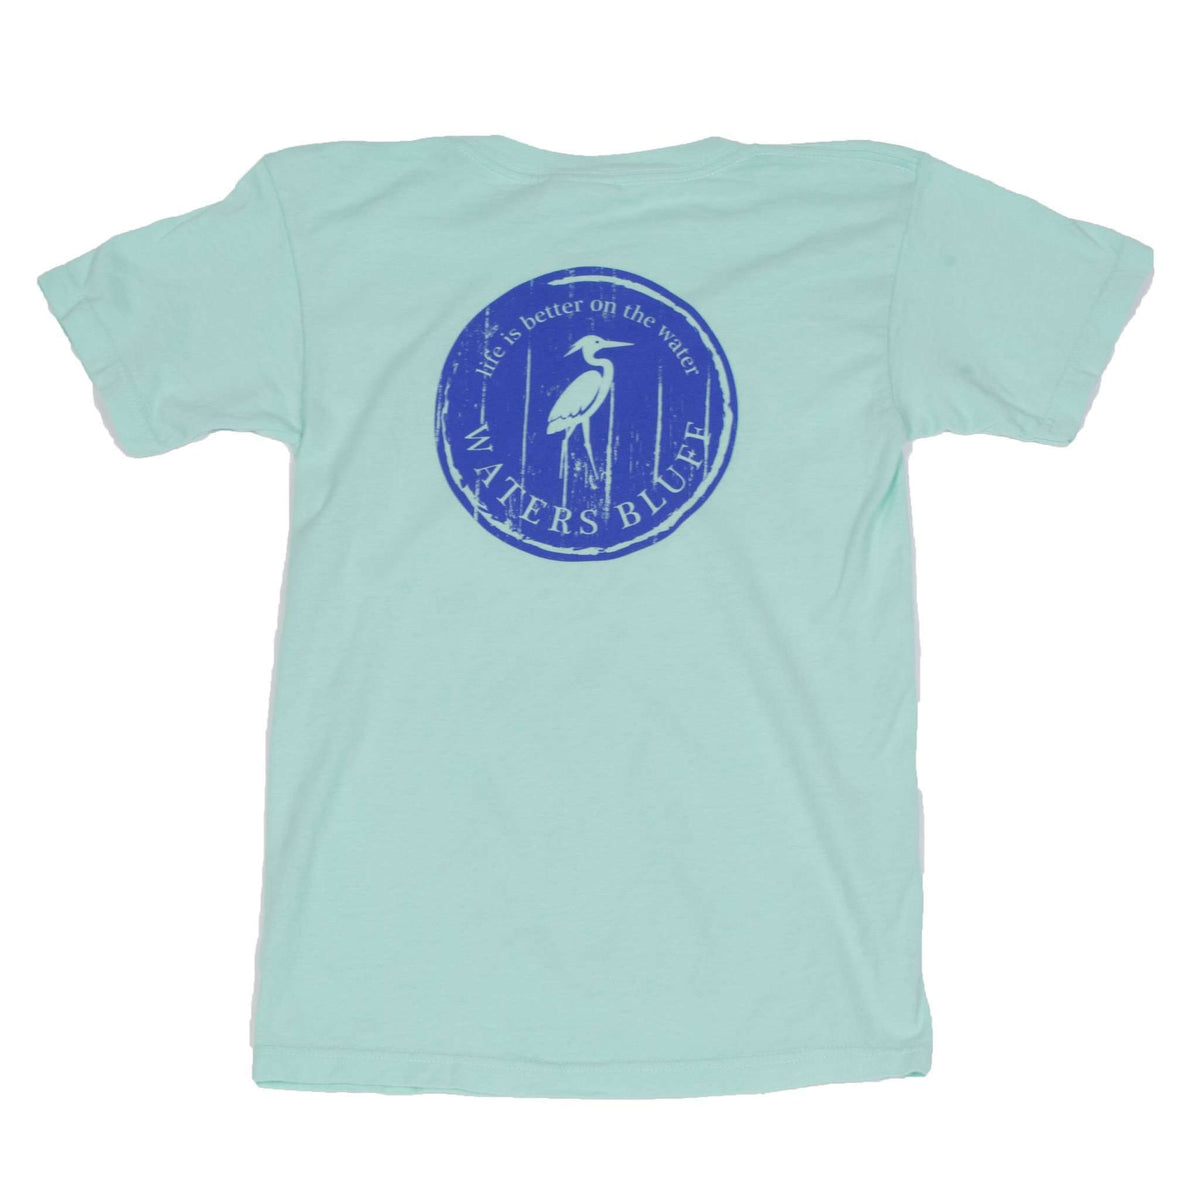 Youth Wood Grain Tee Shirt in Island Reef by Waters Bluff - Country Club Prep